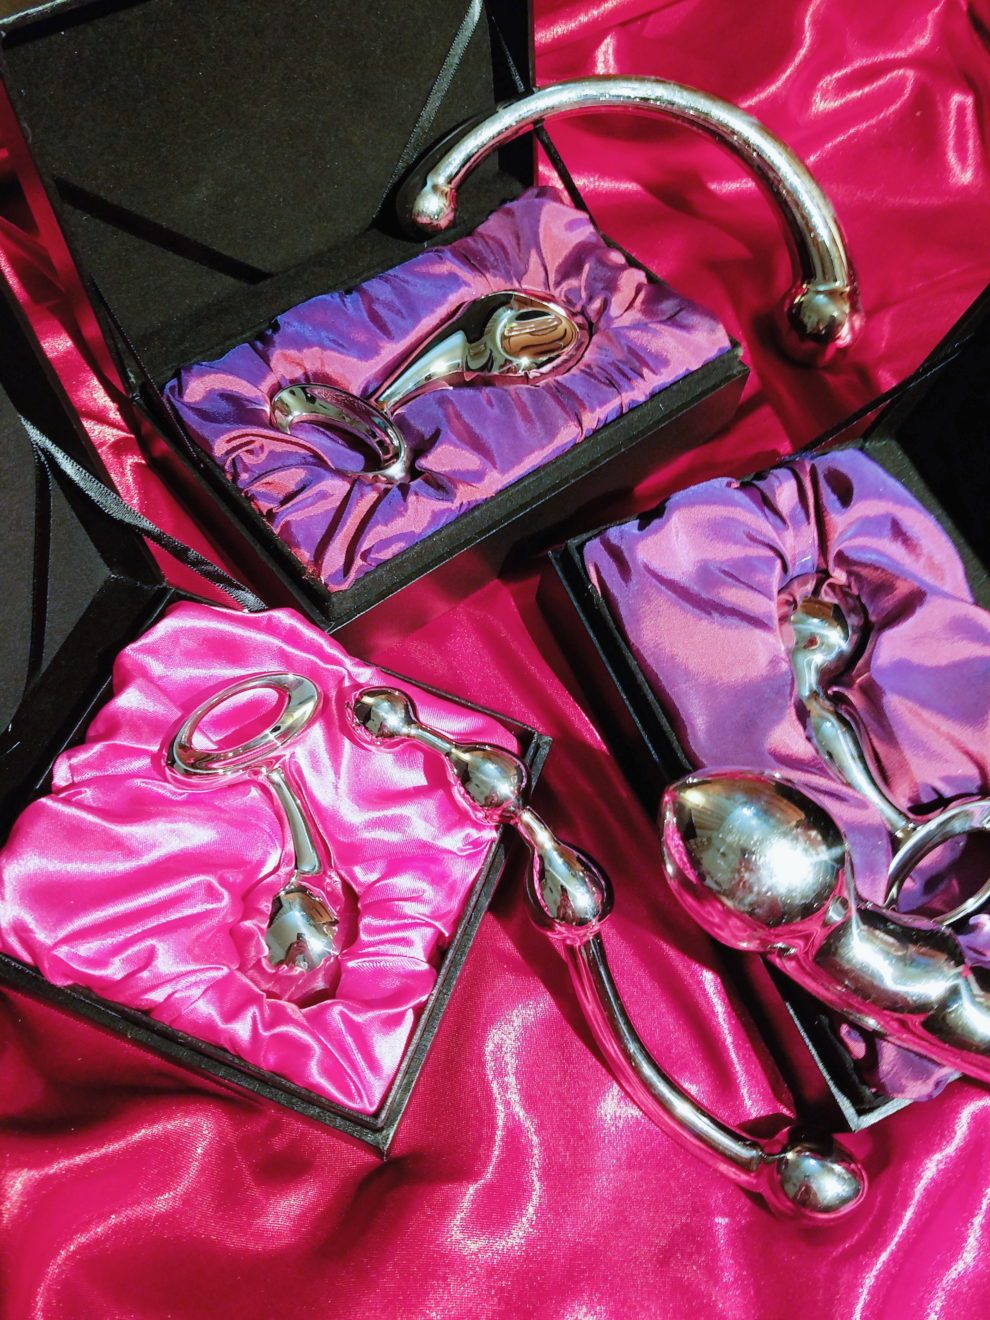 [Image: njoy stainless steel sex toy boxes with red and pink satin]